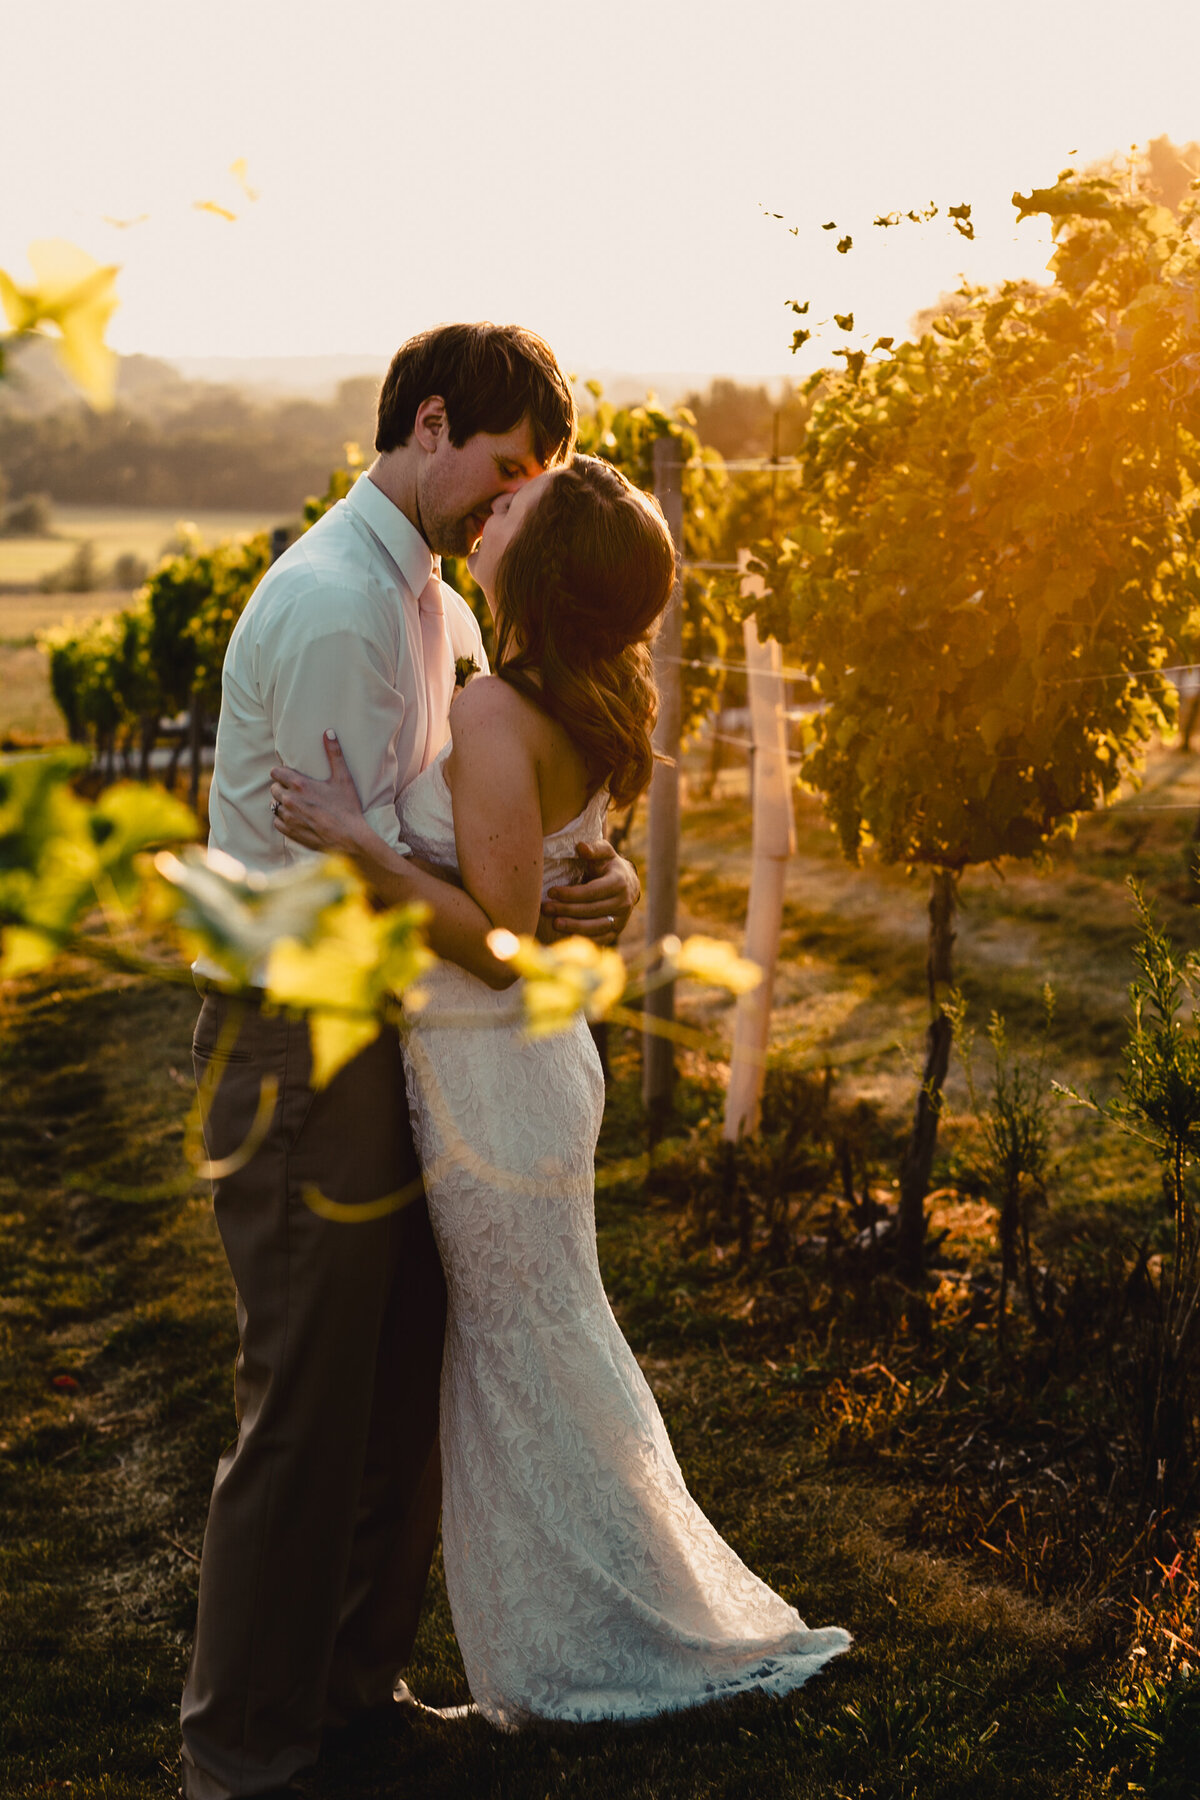 Witness the magic of a romantic sunset embrace captured by Love Alexandra Photography. The warm hues of twilight envelop this loving couple, creating an unforgettable moment of connection and love. Explore more enchanting moments that celebrate the beauty of togetherness.